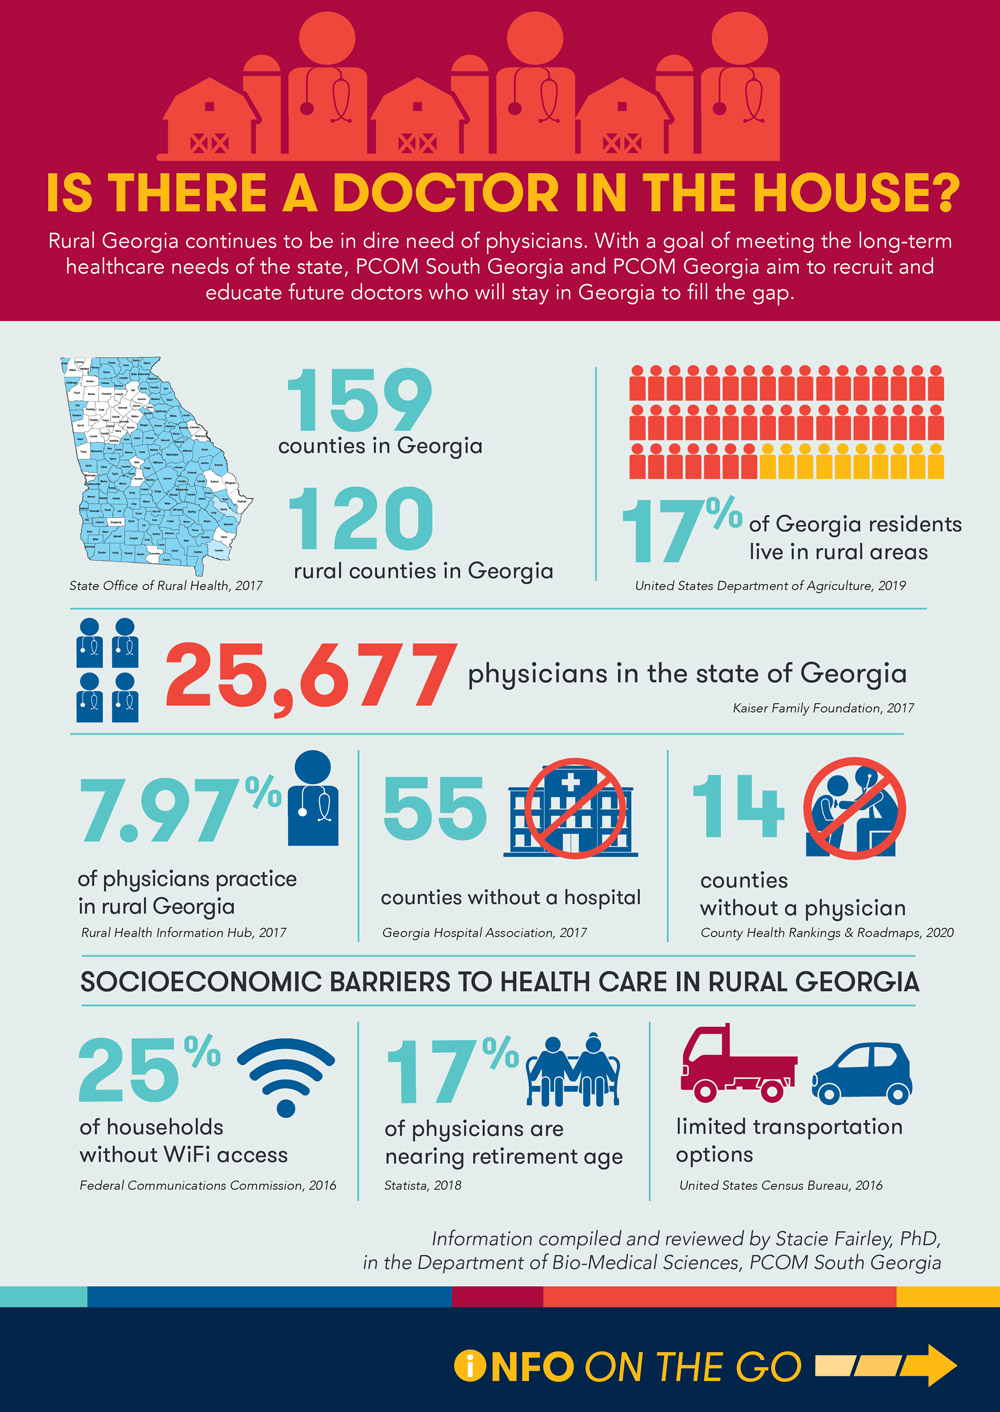 Vector art infographic showing statistics for rural physicians and healthcare shortages in rural Georgia.